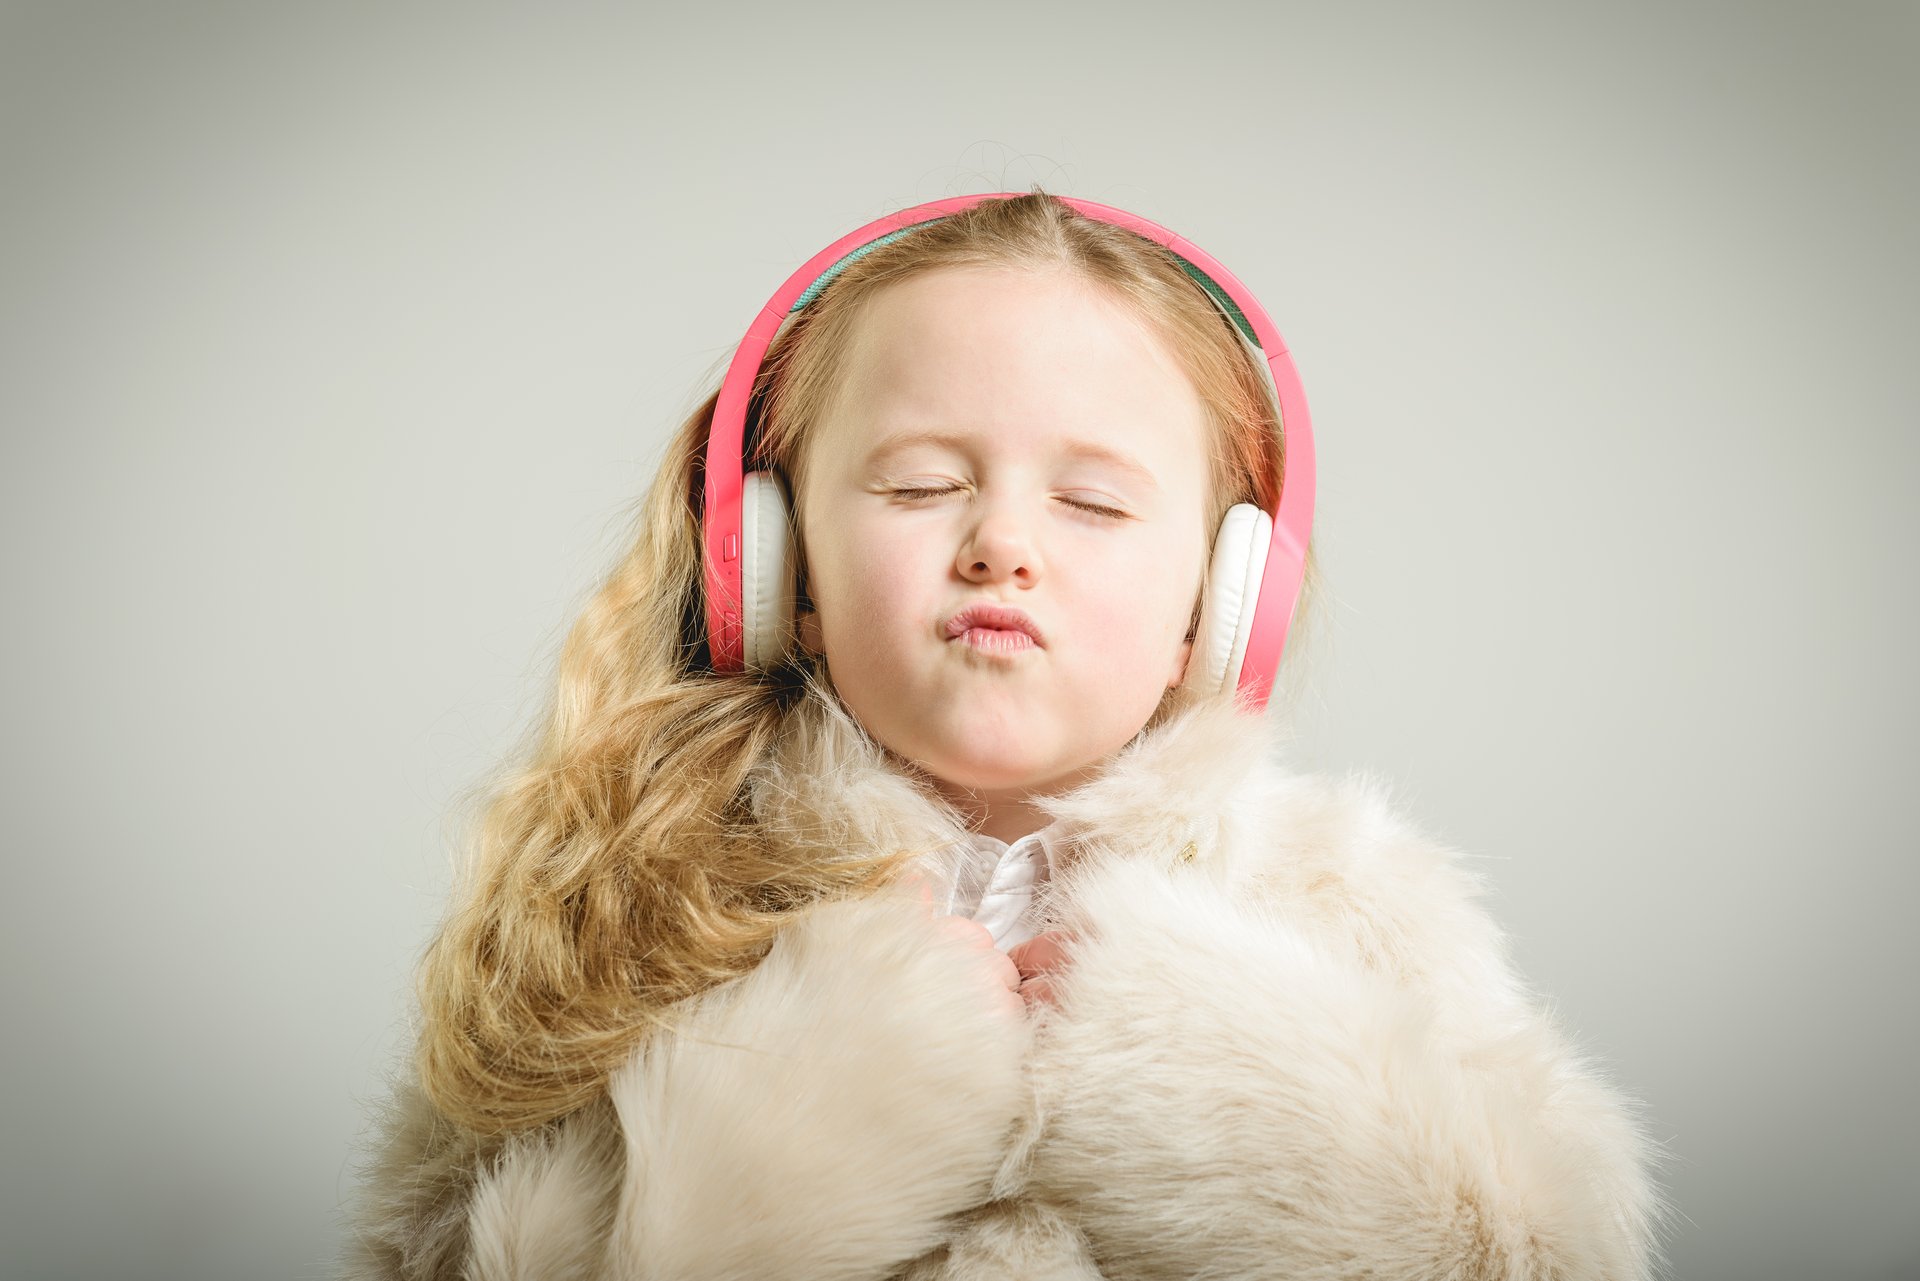 A young girl listens to music on pink headphones